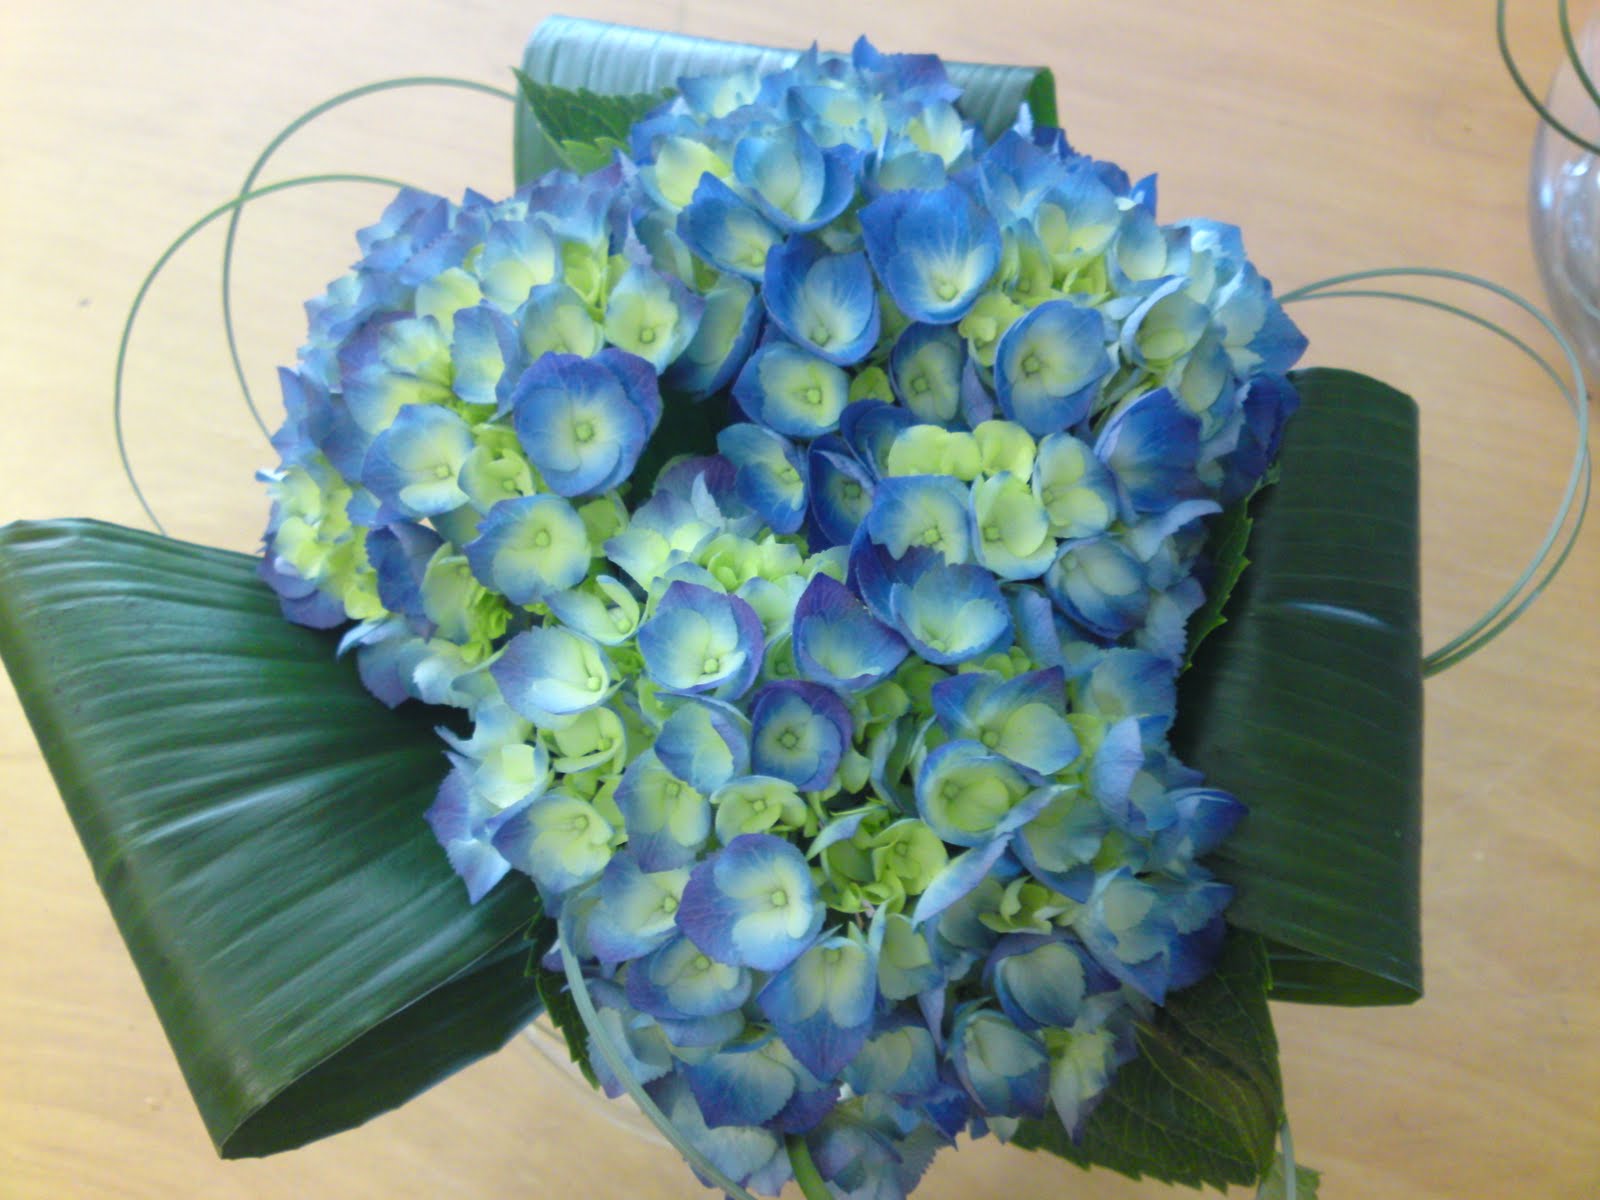 More blue themed flowers.